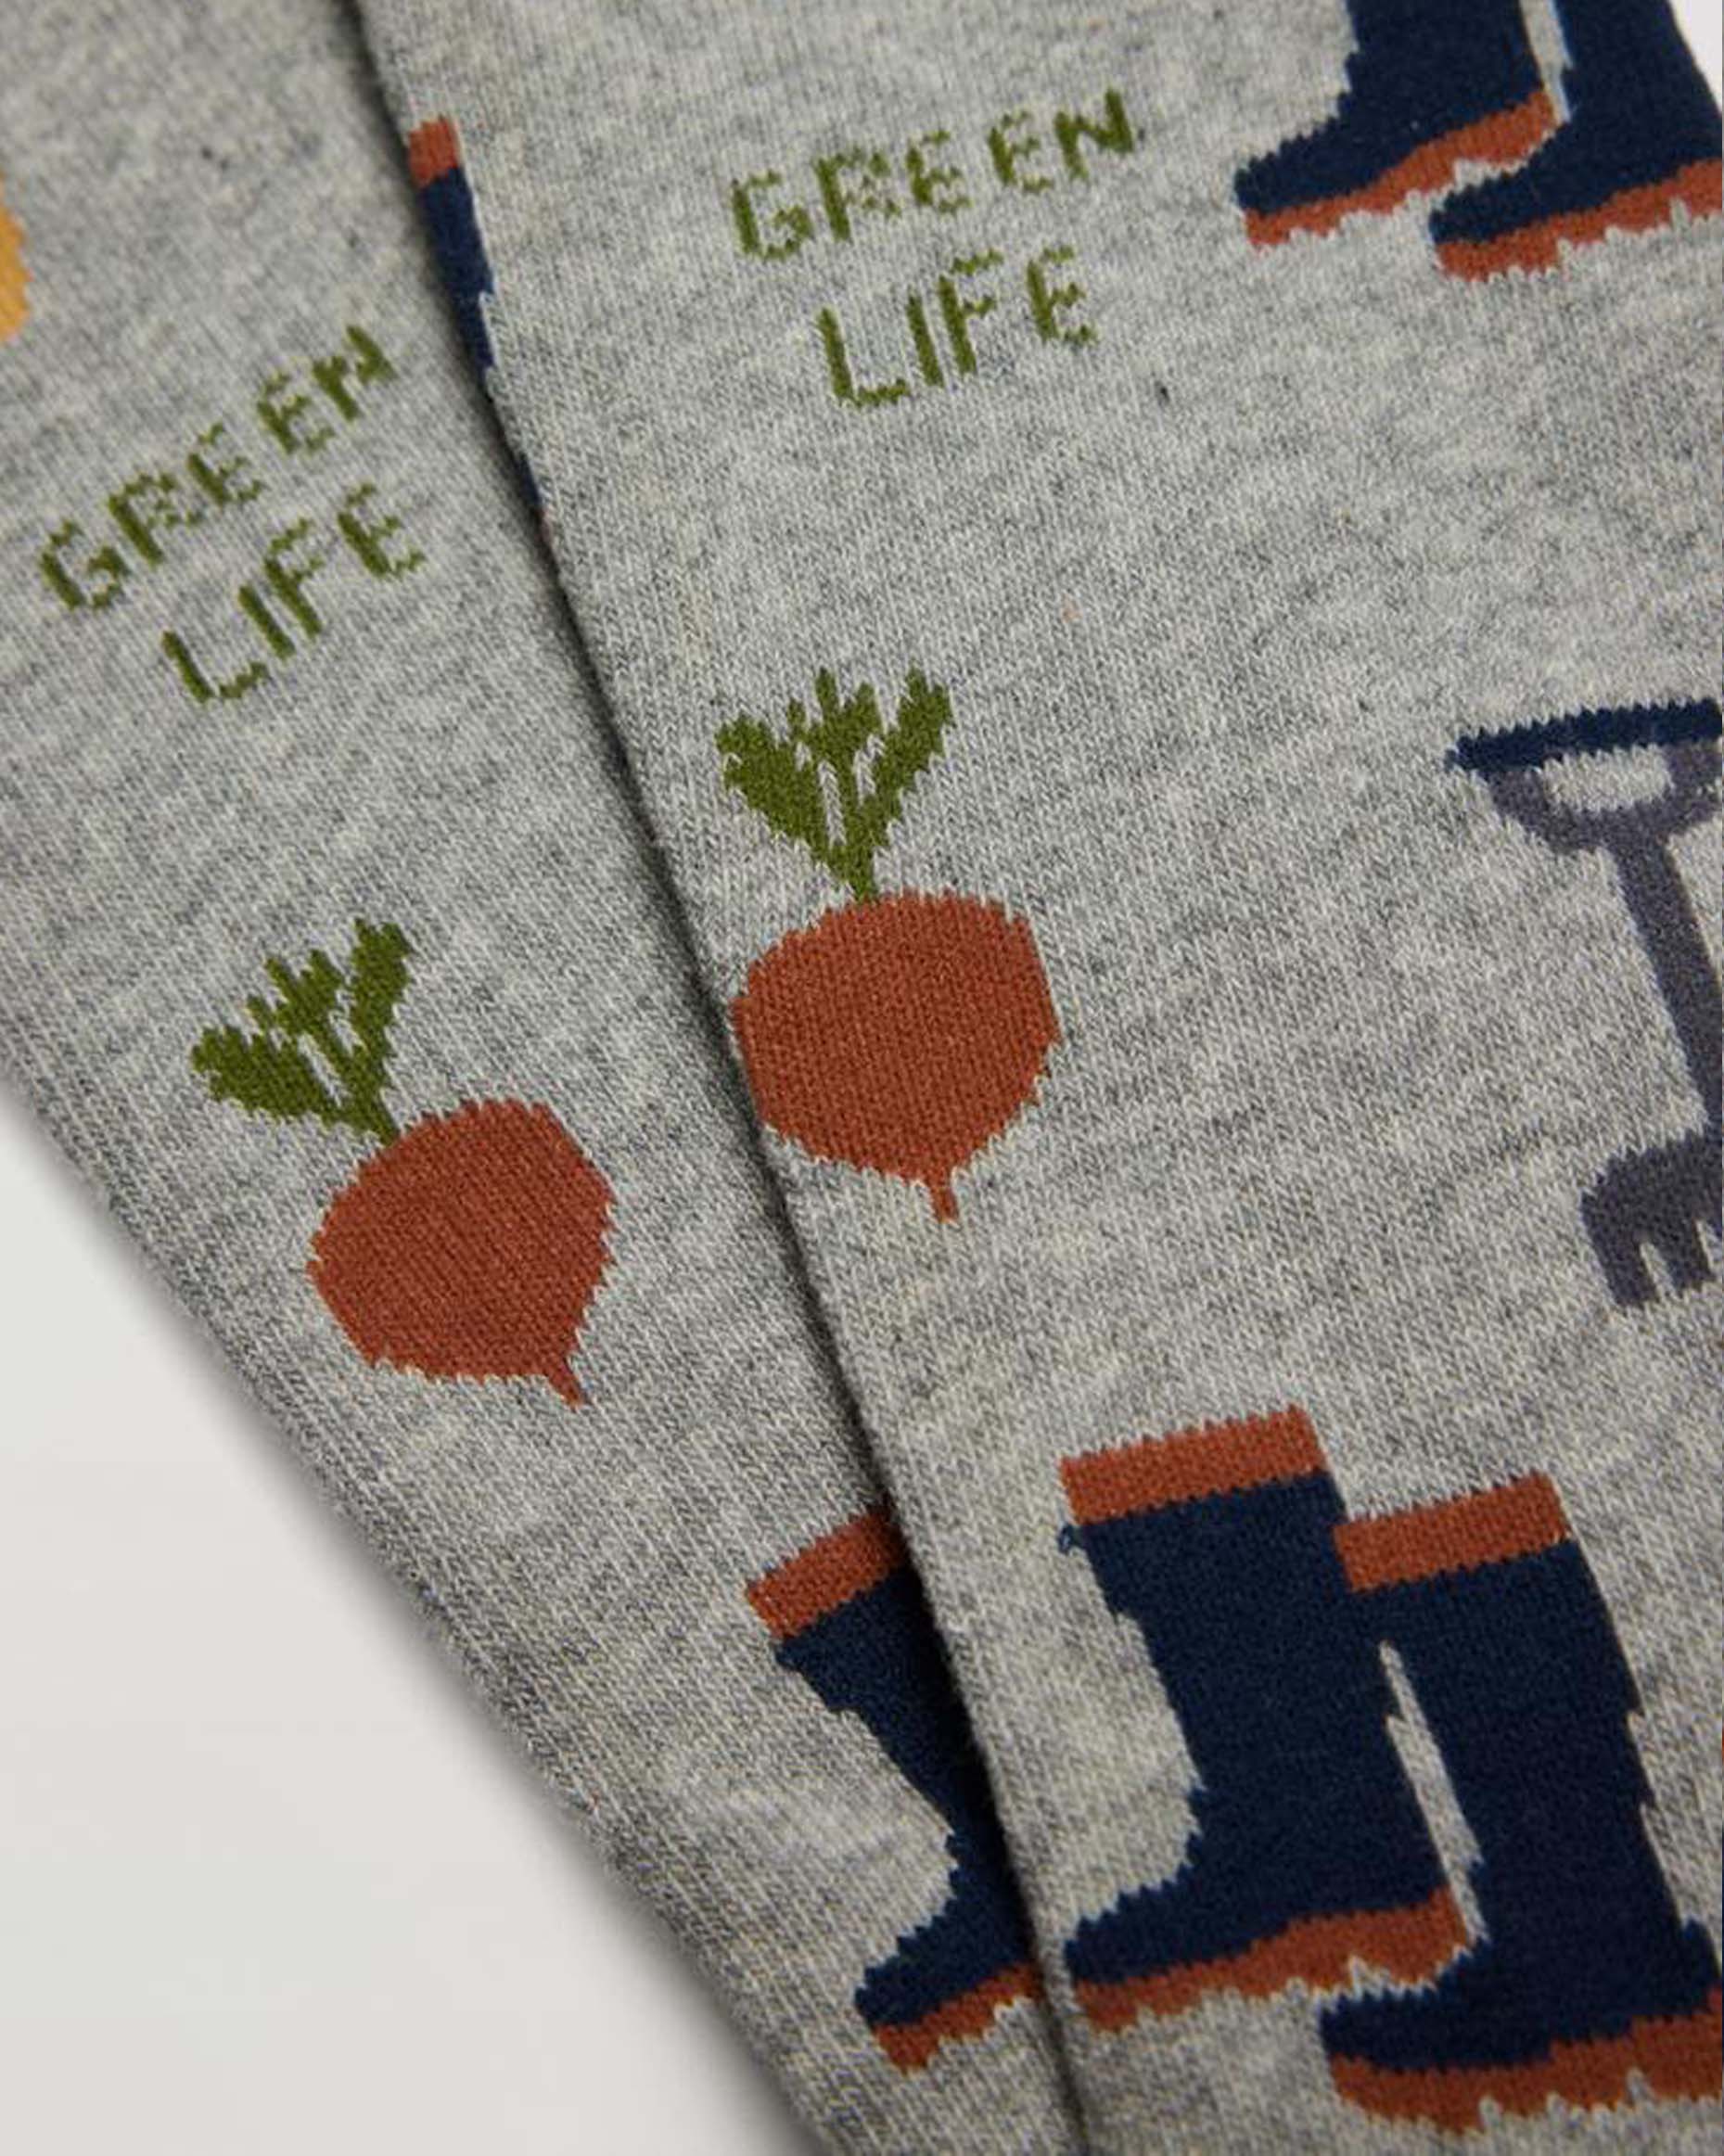 Ysabel Mora 22885 Green Life Sock - Light grey thermal cotton mix crew length ankle socks with a gardening themed pattern of wellington boots, carrots and turnips, rake and the words 'green life', thick terry lining and no cuff roll-top cuff.